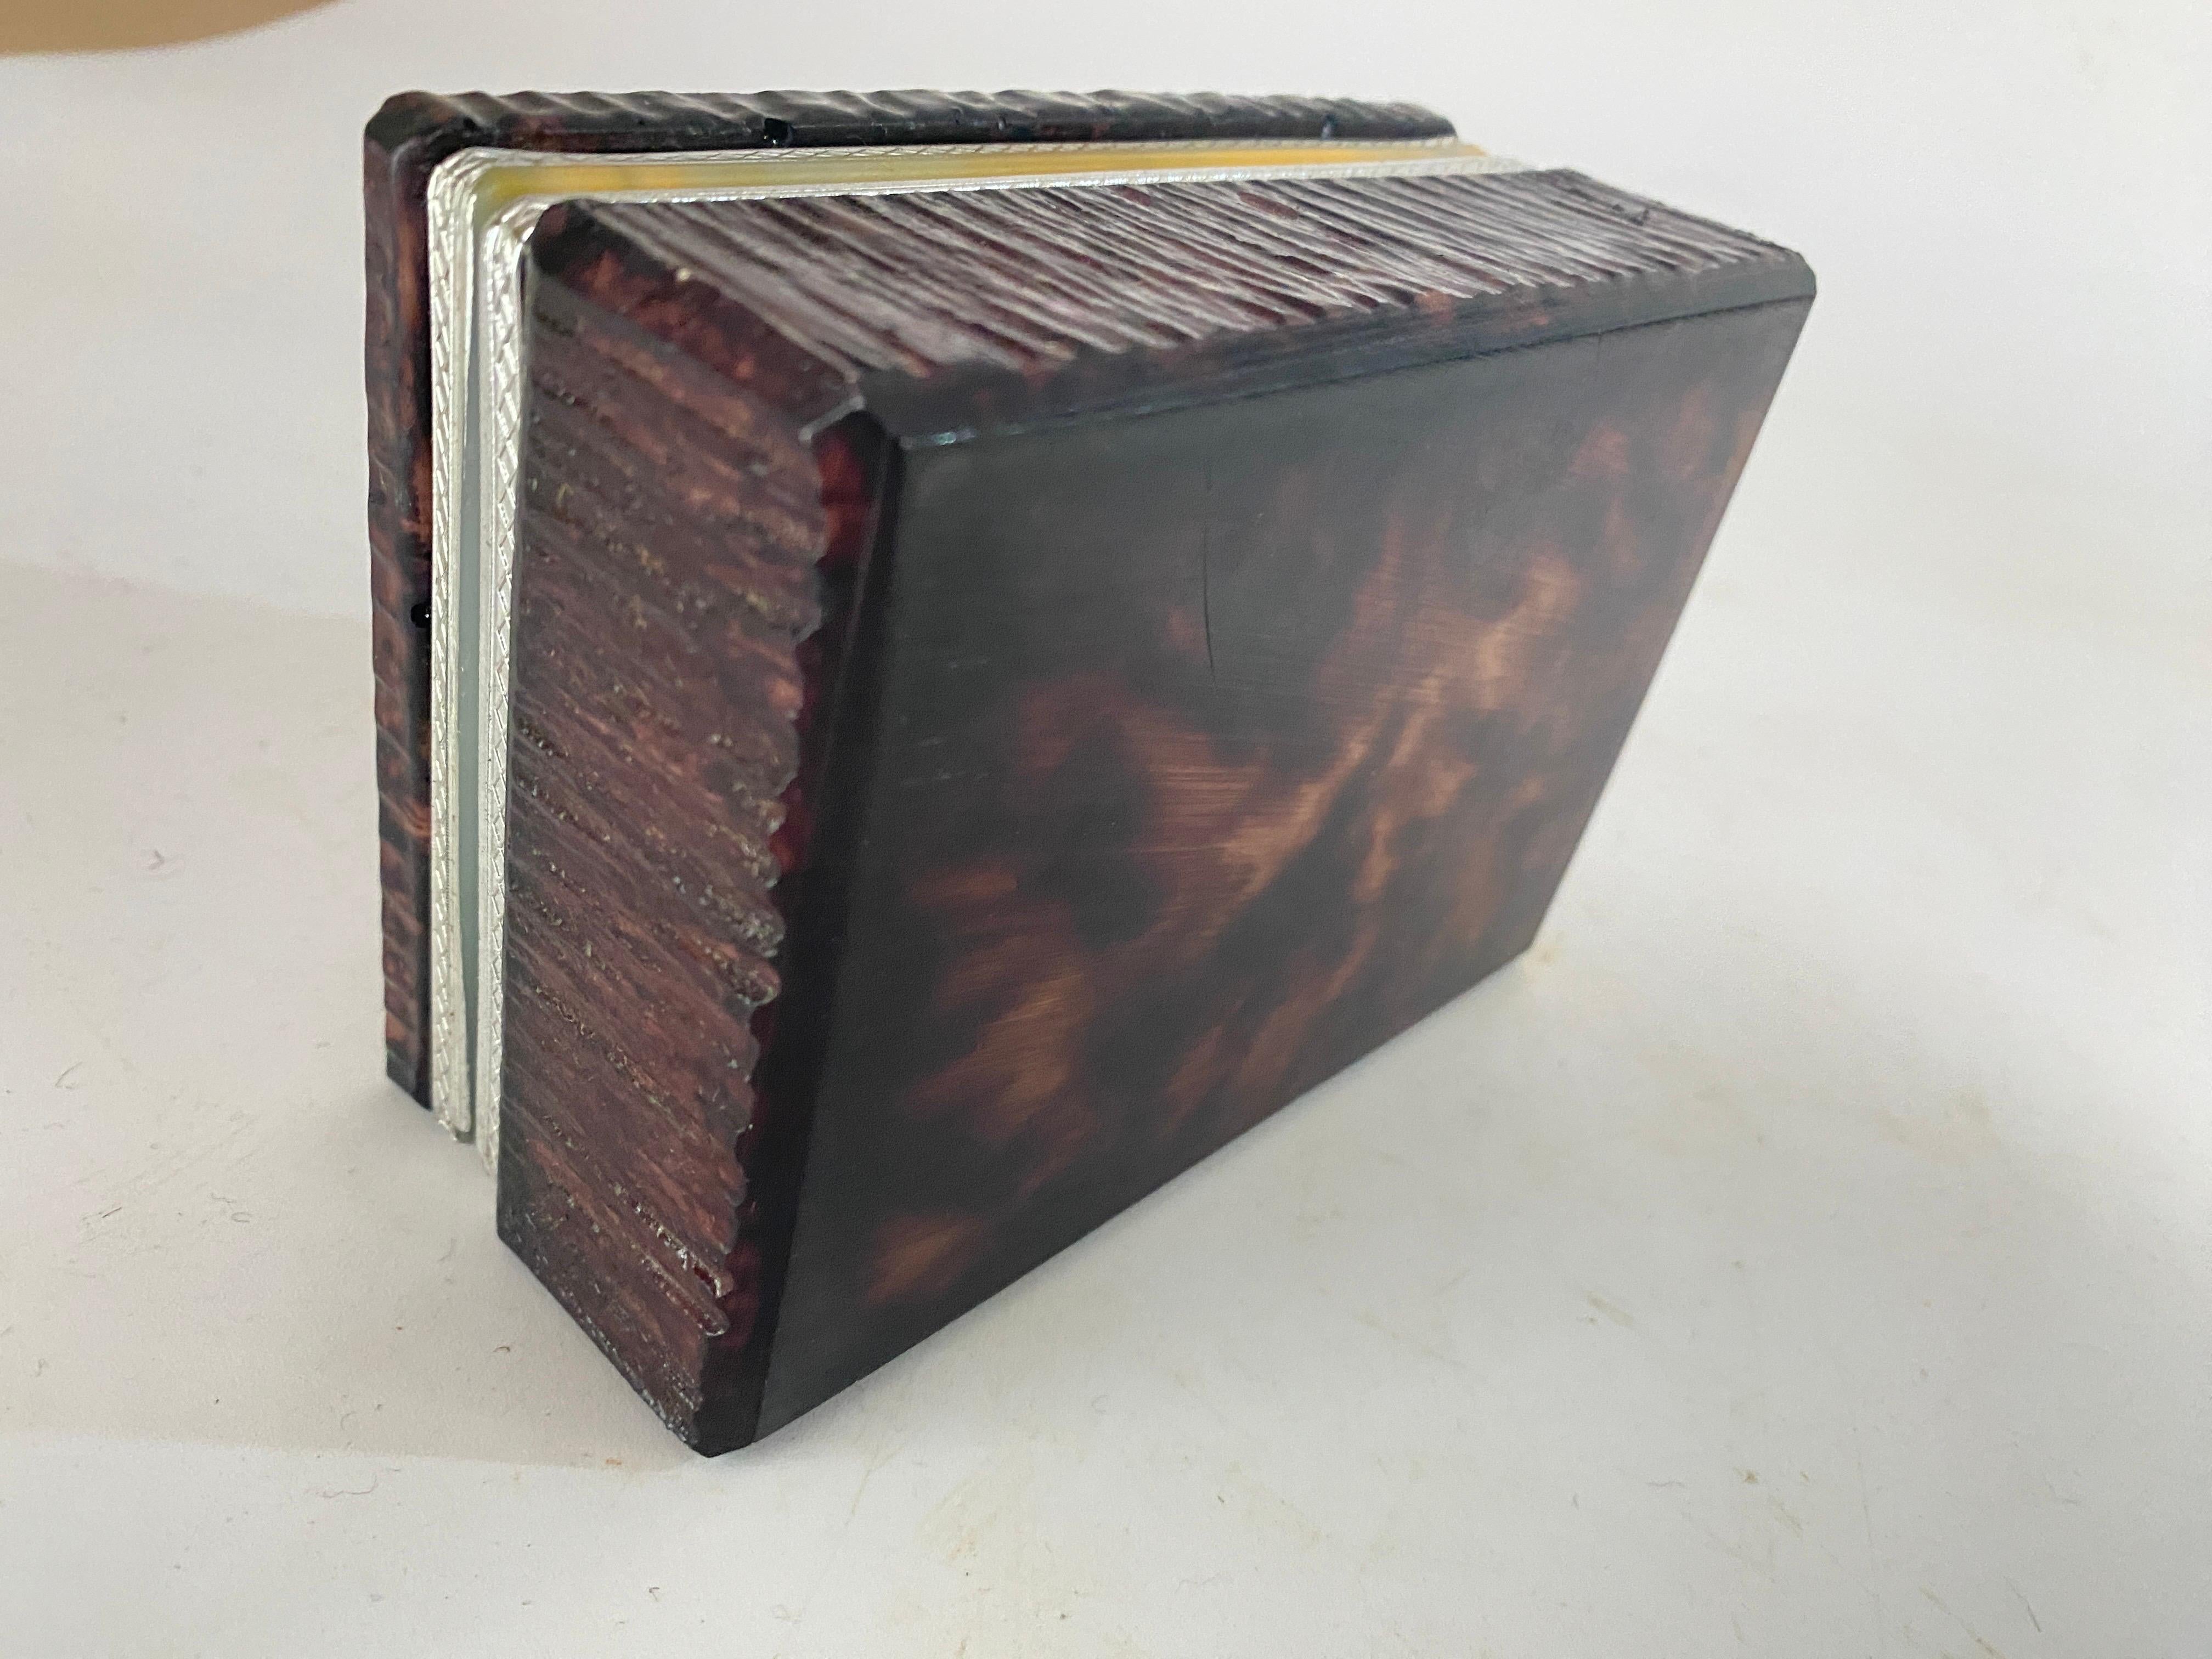 Italian Onyx Box Decorative or Jewelry Box Brown Color Made in Italy circa 1970 For Sale